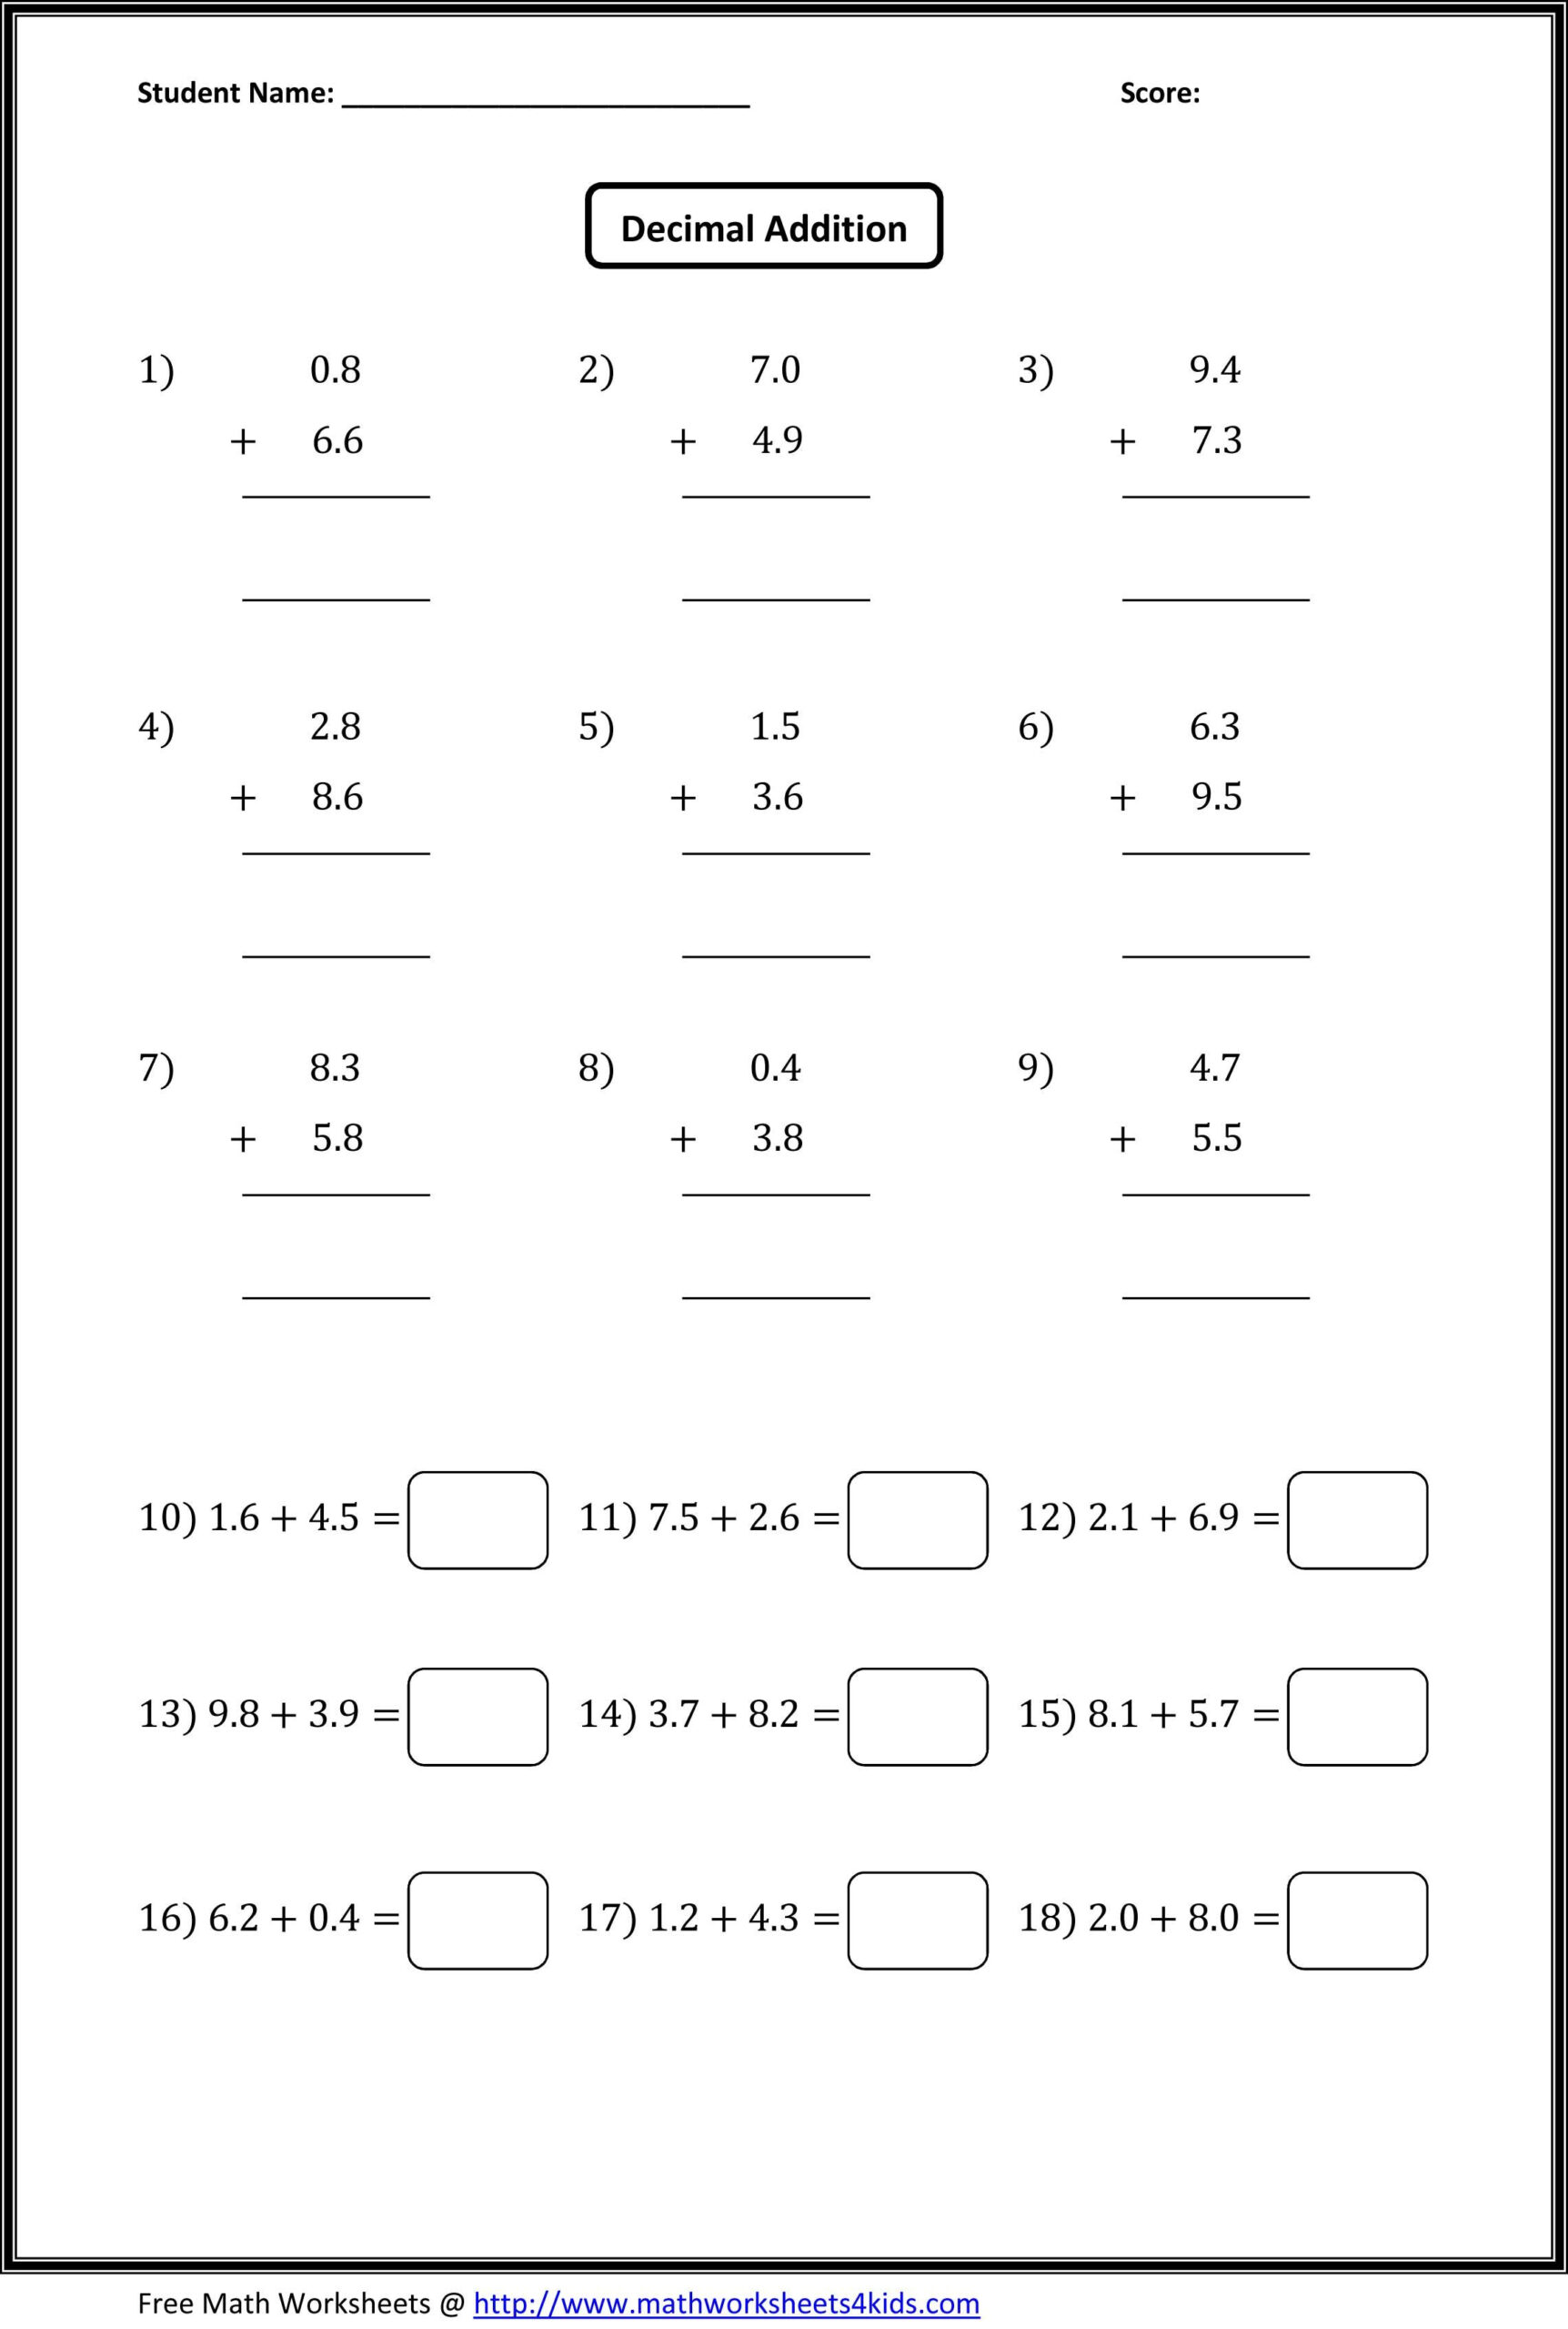 adding-and-subtracting-signed-numbers-worksheet-pdf-2022-numbersworksheets